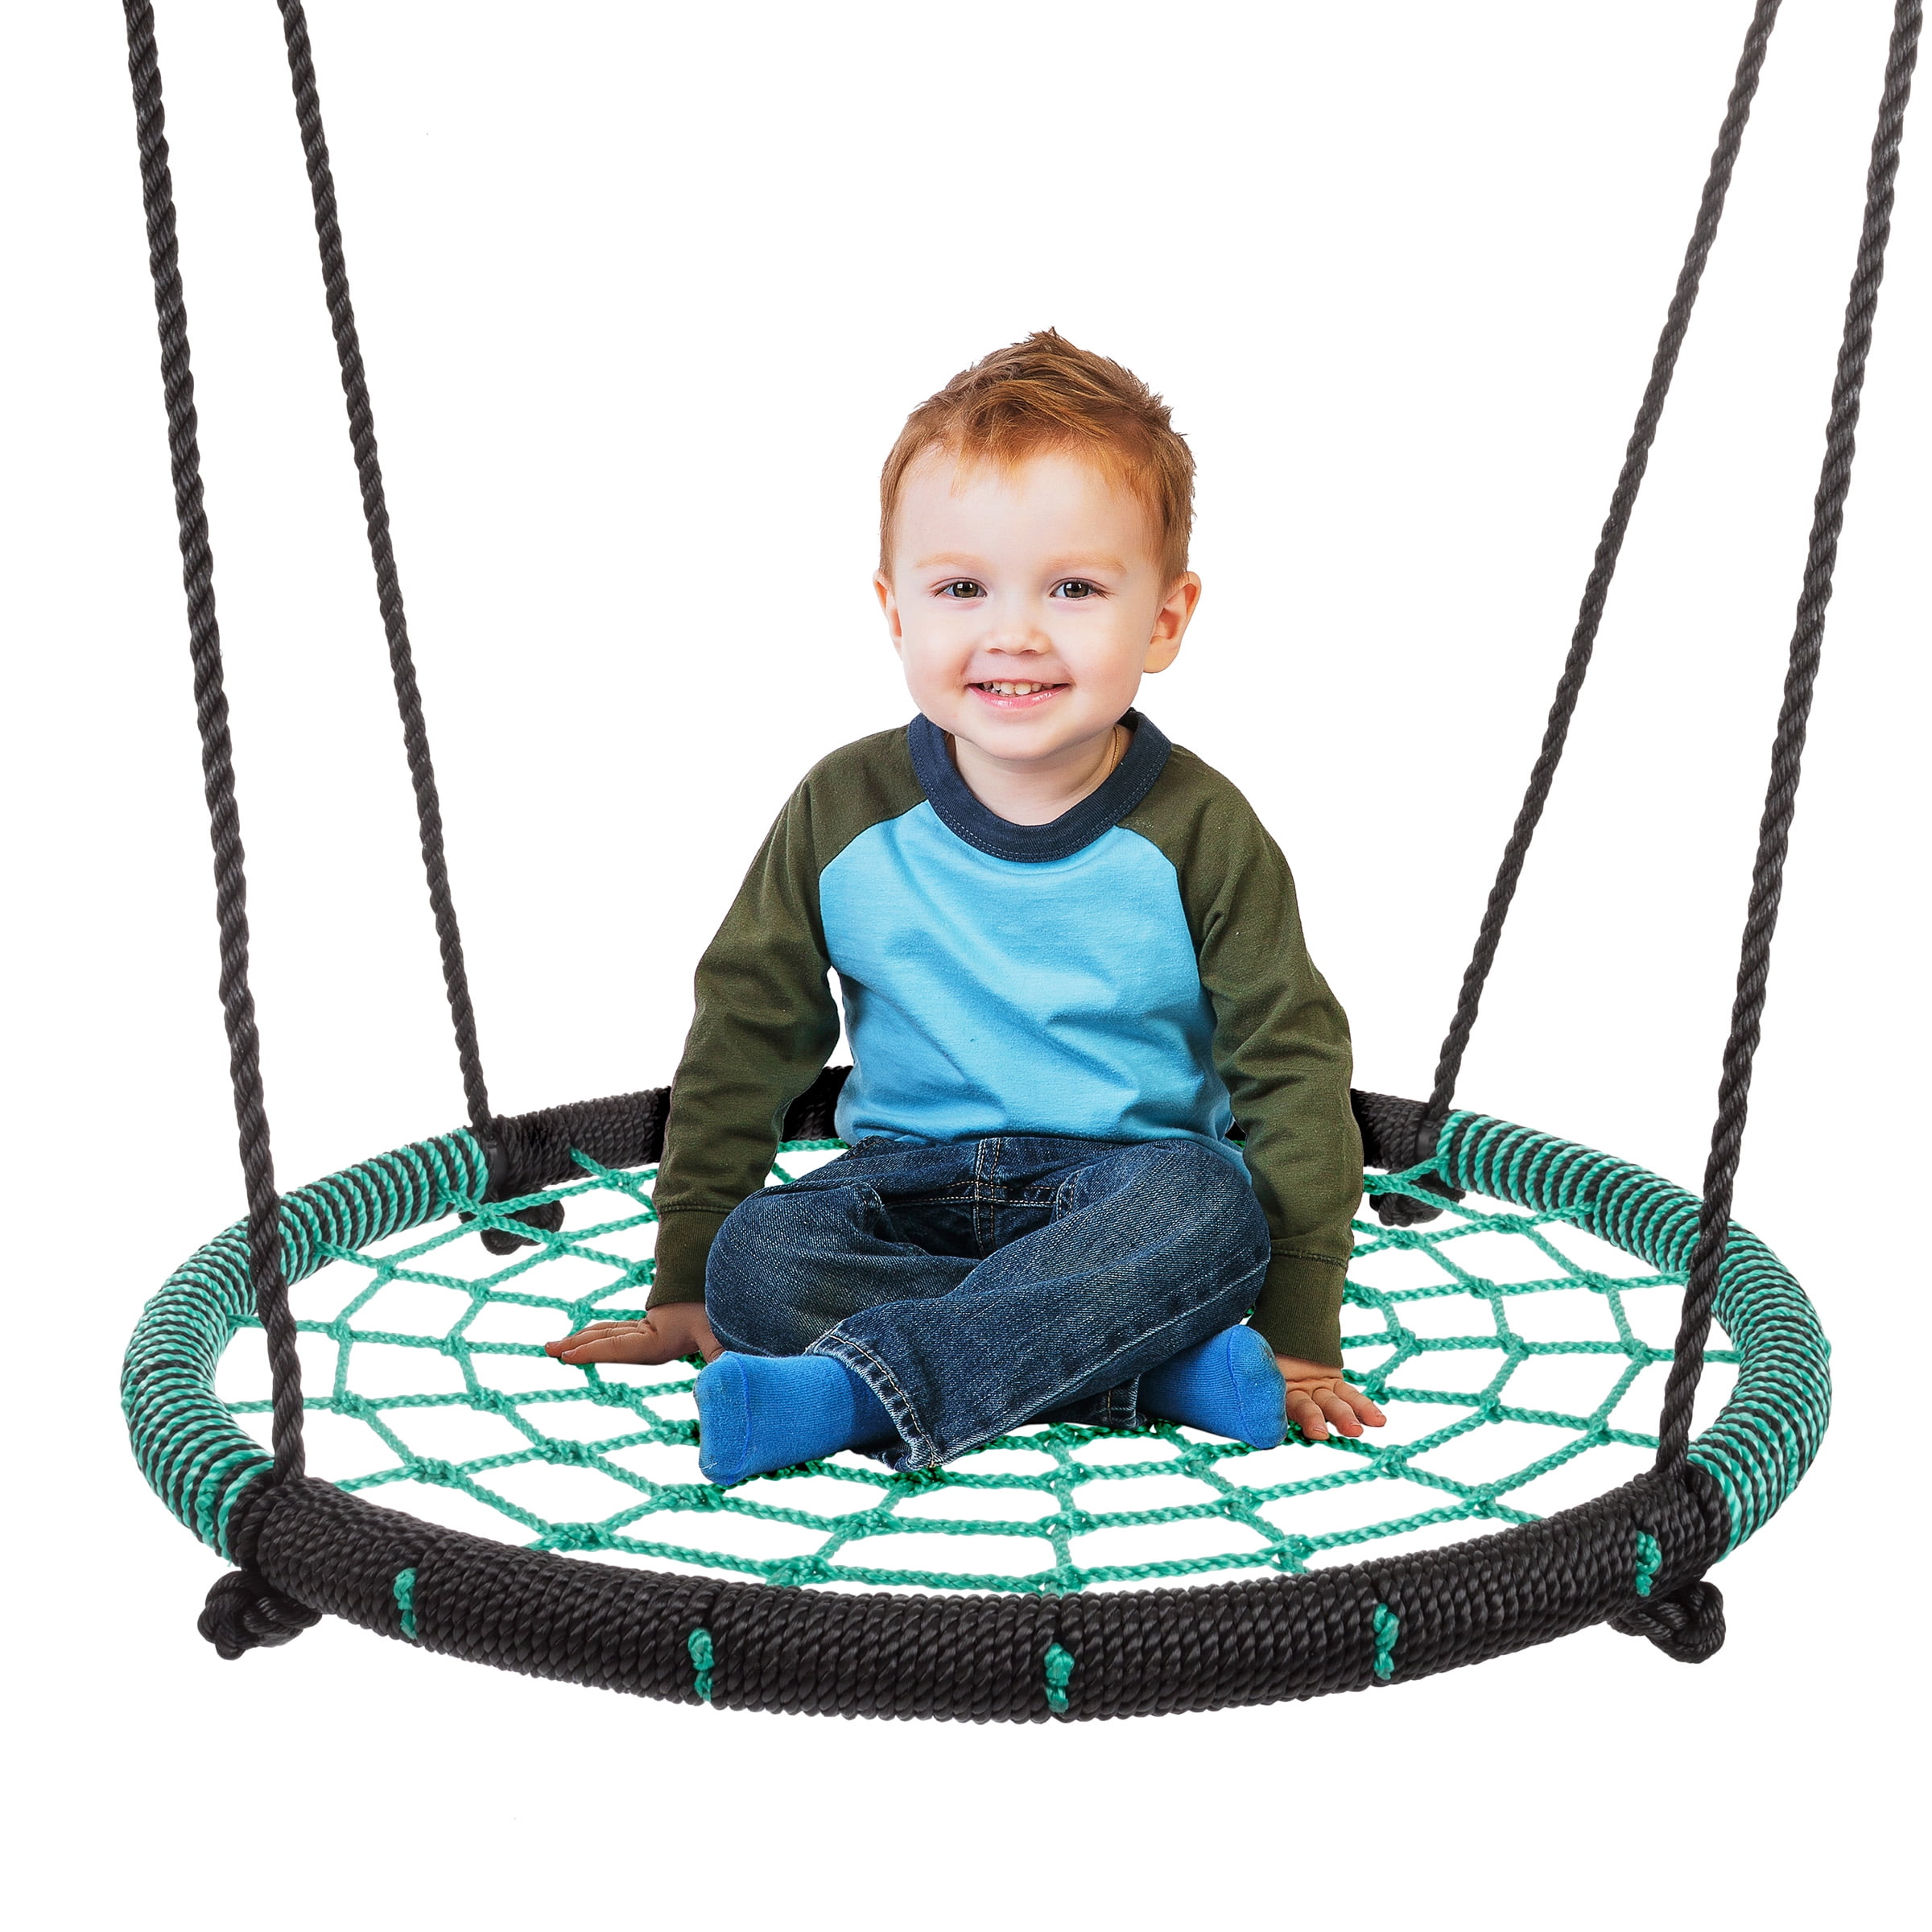 ZENY Outdoor 24 Spider Web Tree Swing Seat Heavy Duty Playground Platform Swing Nylon Rope Detachable Complete Set,Outdoor Hanging Play Slide Seat